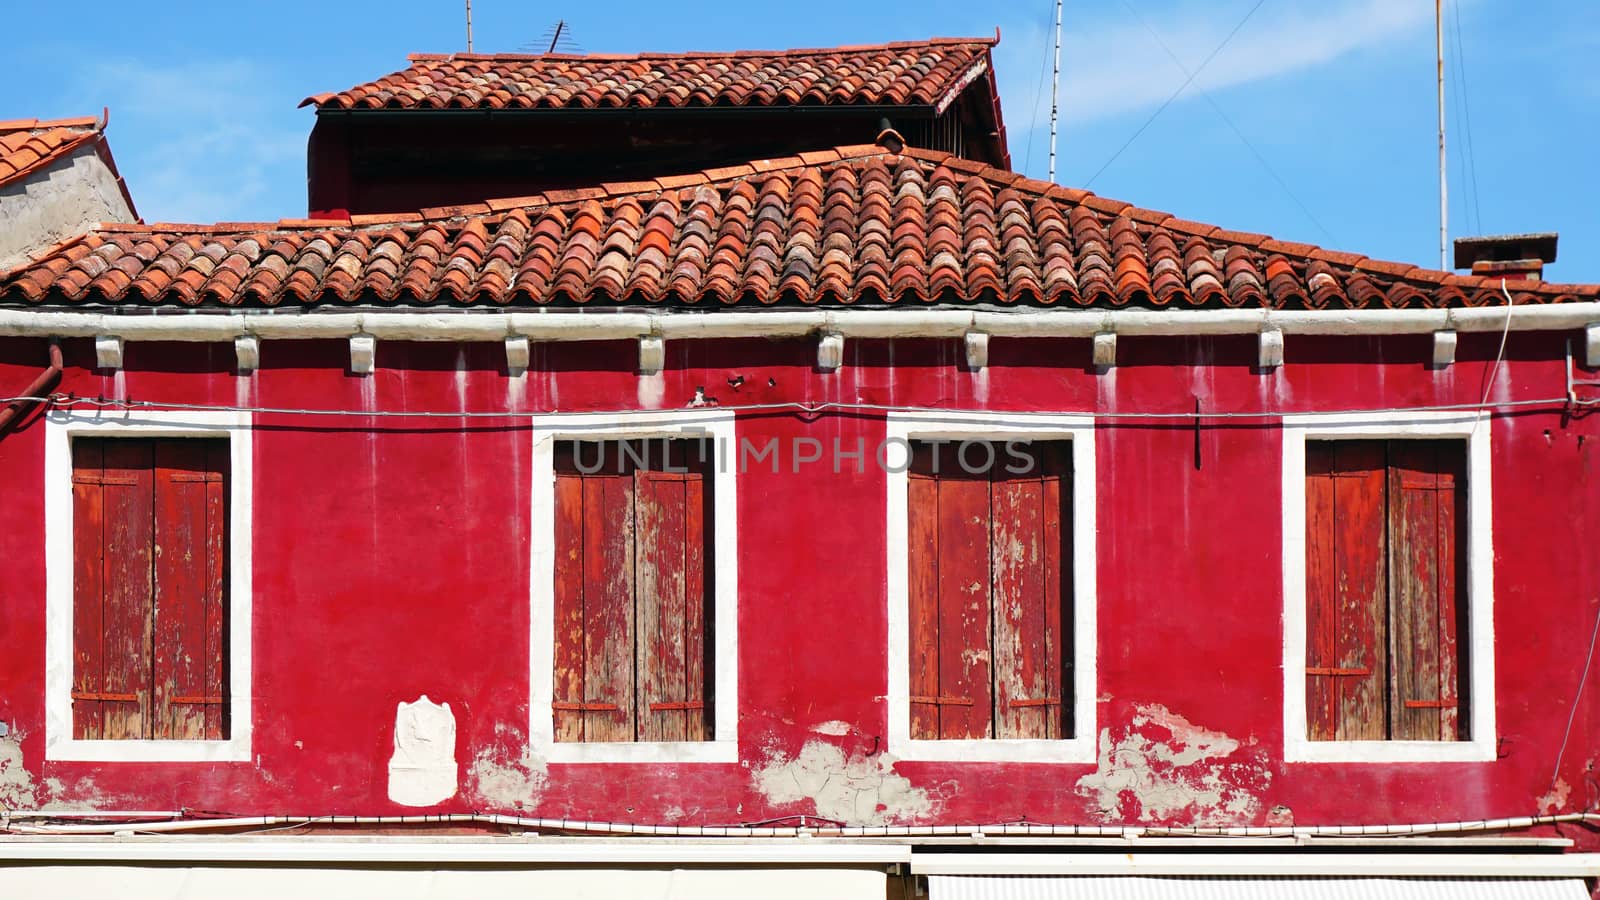 old window house and roof with red color wall architecture in Murano, Venice, Italy